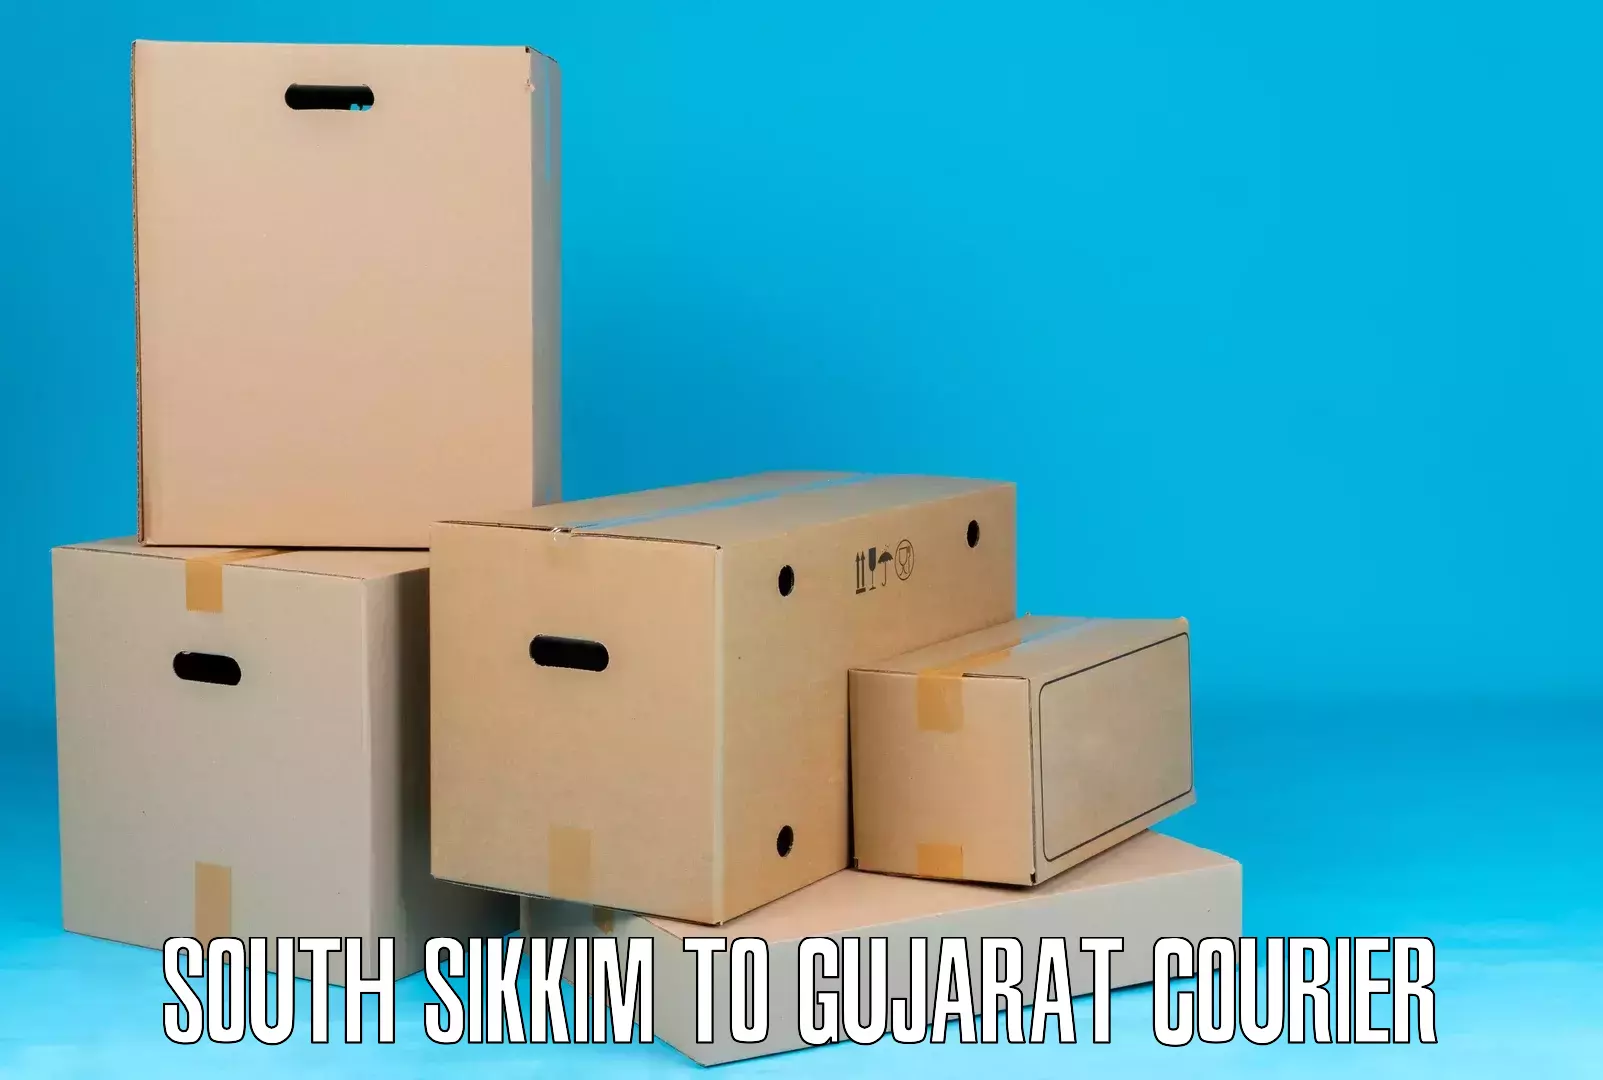 Professional courier handling South Sikkim to Anand